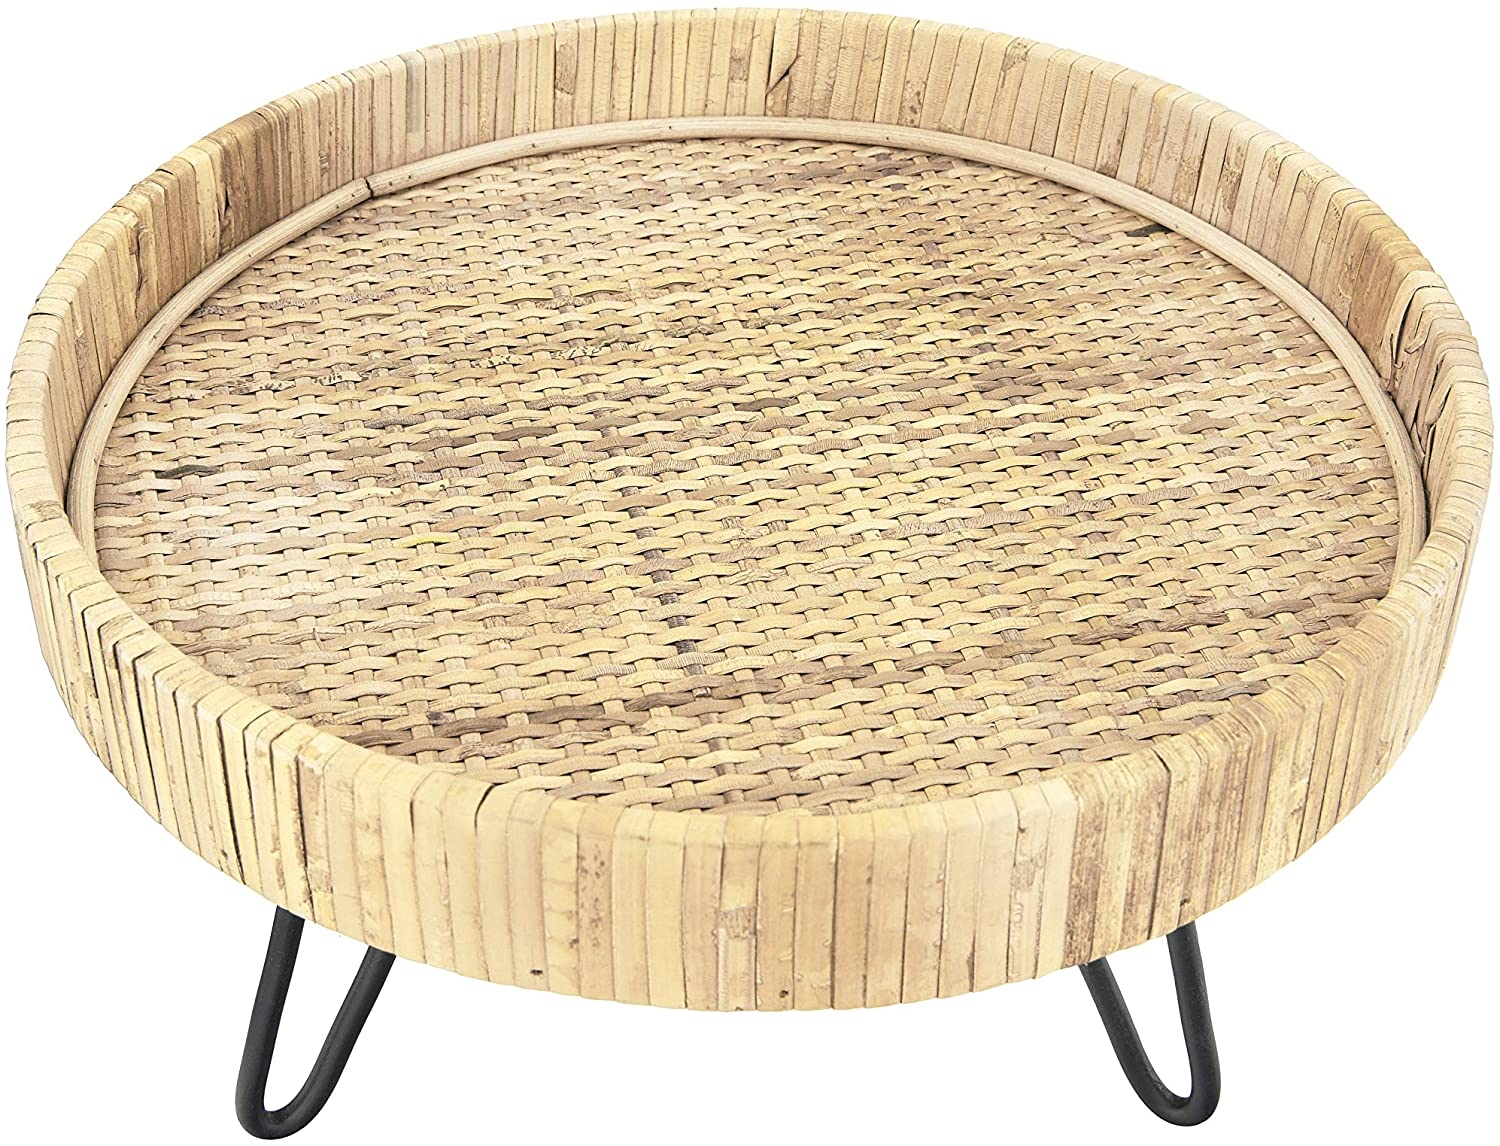 11.75"R Decorative Woven Rattan Pedestal with Metal Clothespin Feet - Image 4